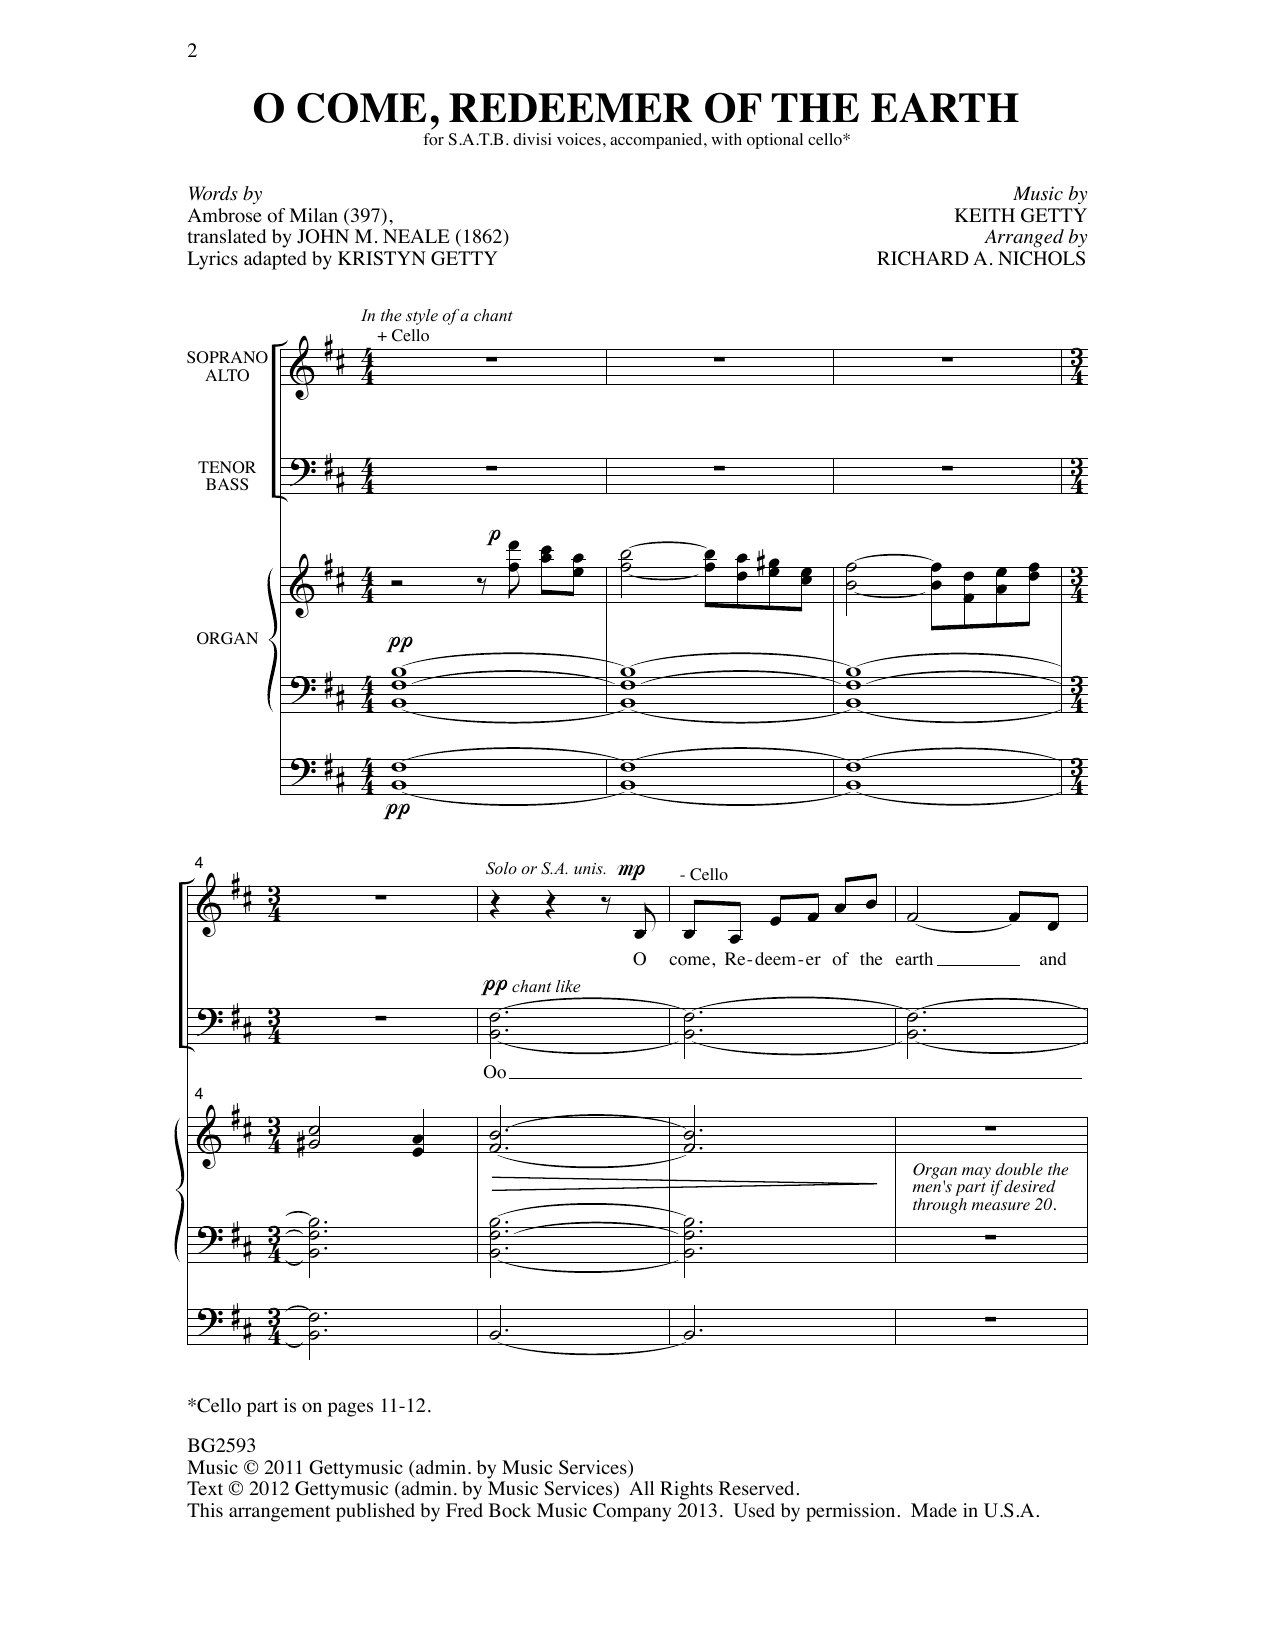 Download Keith Getty O Come, Redeemer Of The Earth (arr. Ric Sheet Music